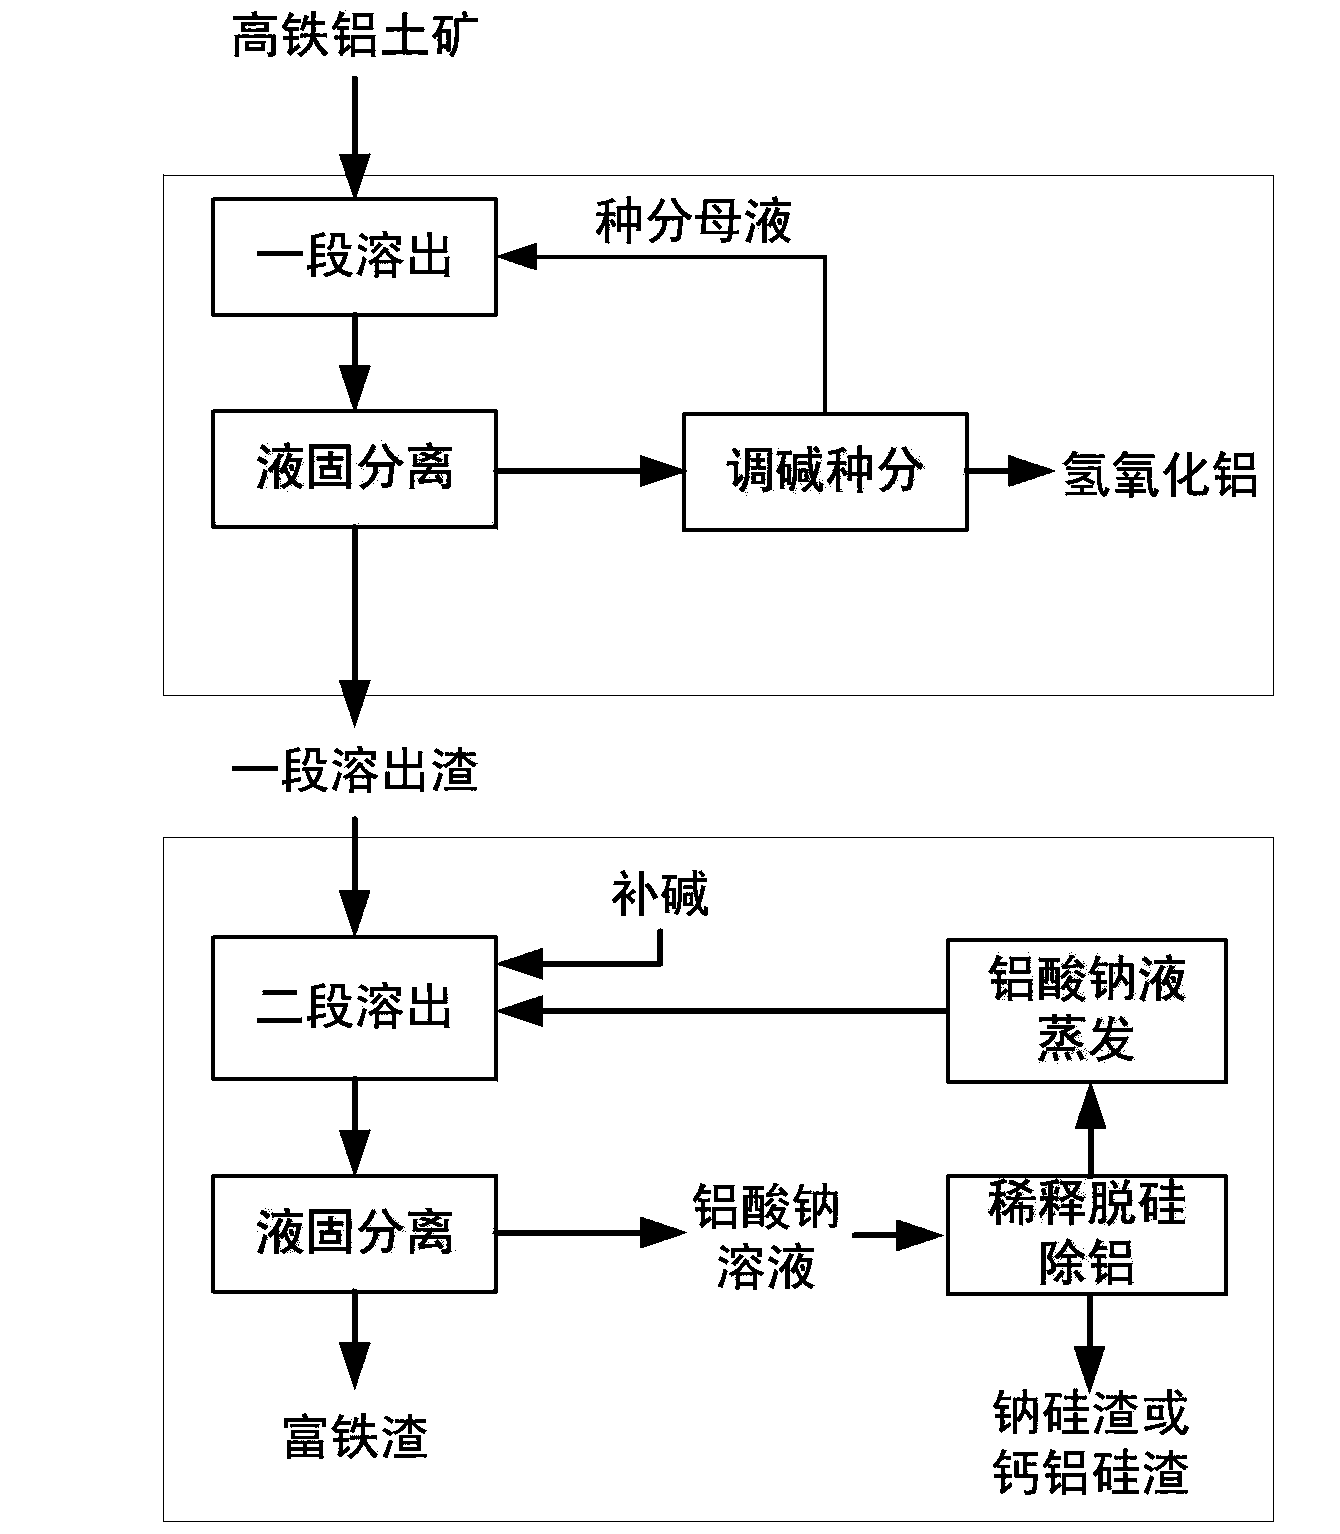 Method for extracting aluminum and iron from high iron gibbsite-type bauxite